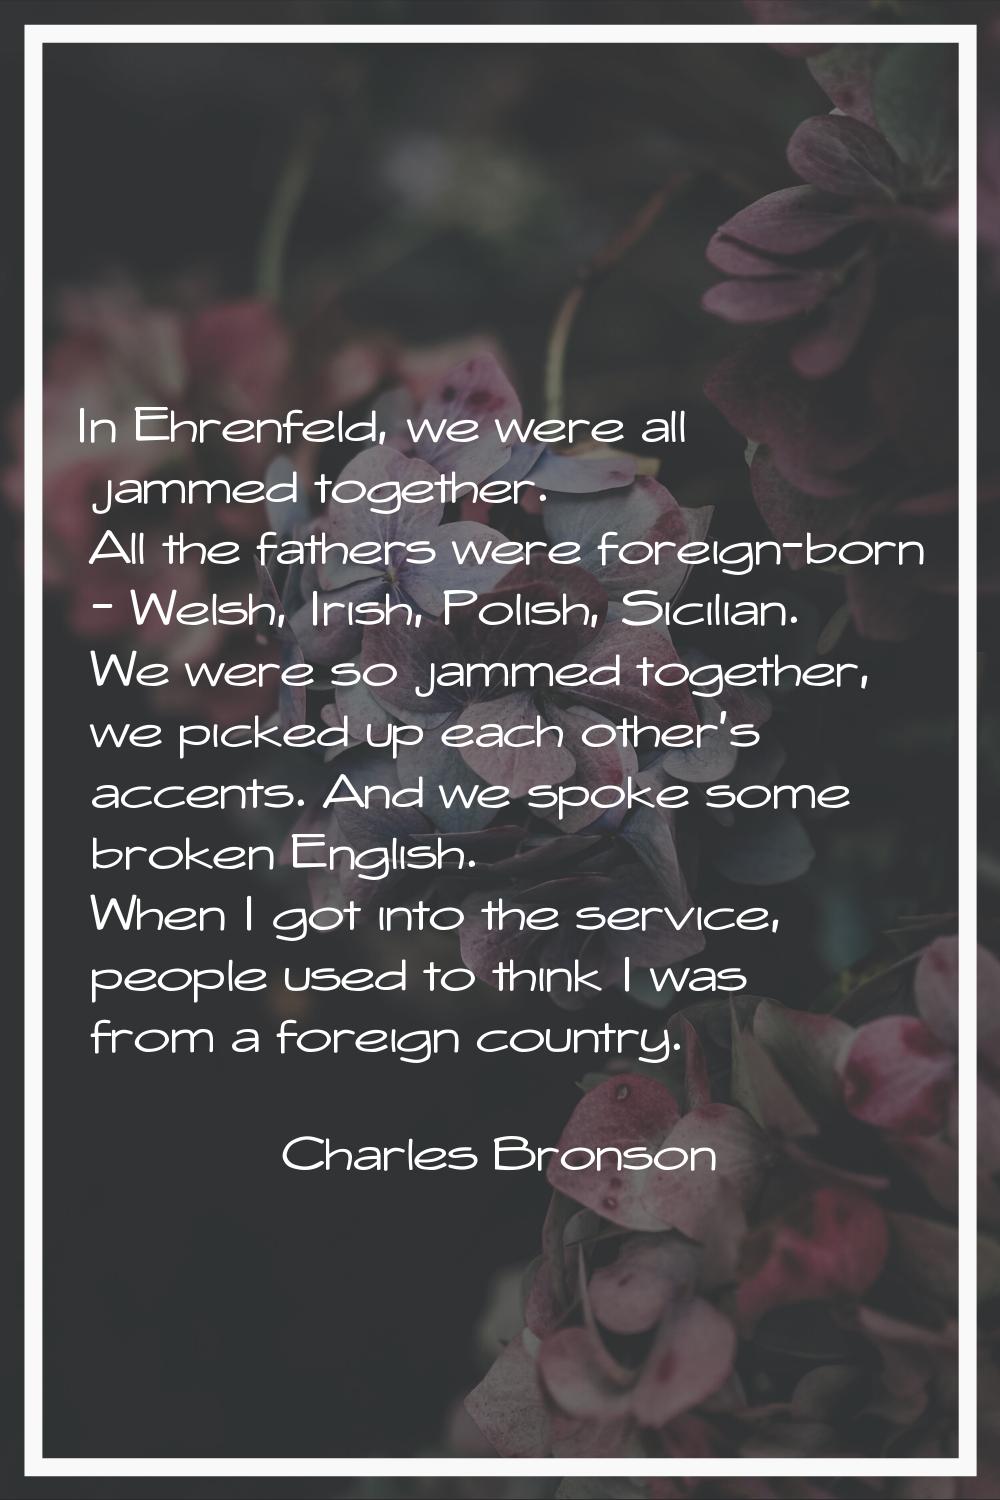 In Ehrenfeld, we were all jammed together. All the fathers were foreign-born - Welsh, Irish, Polish